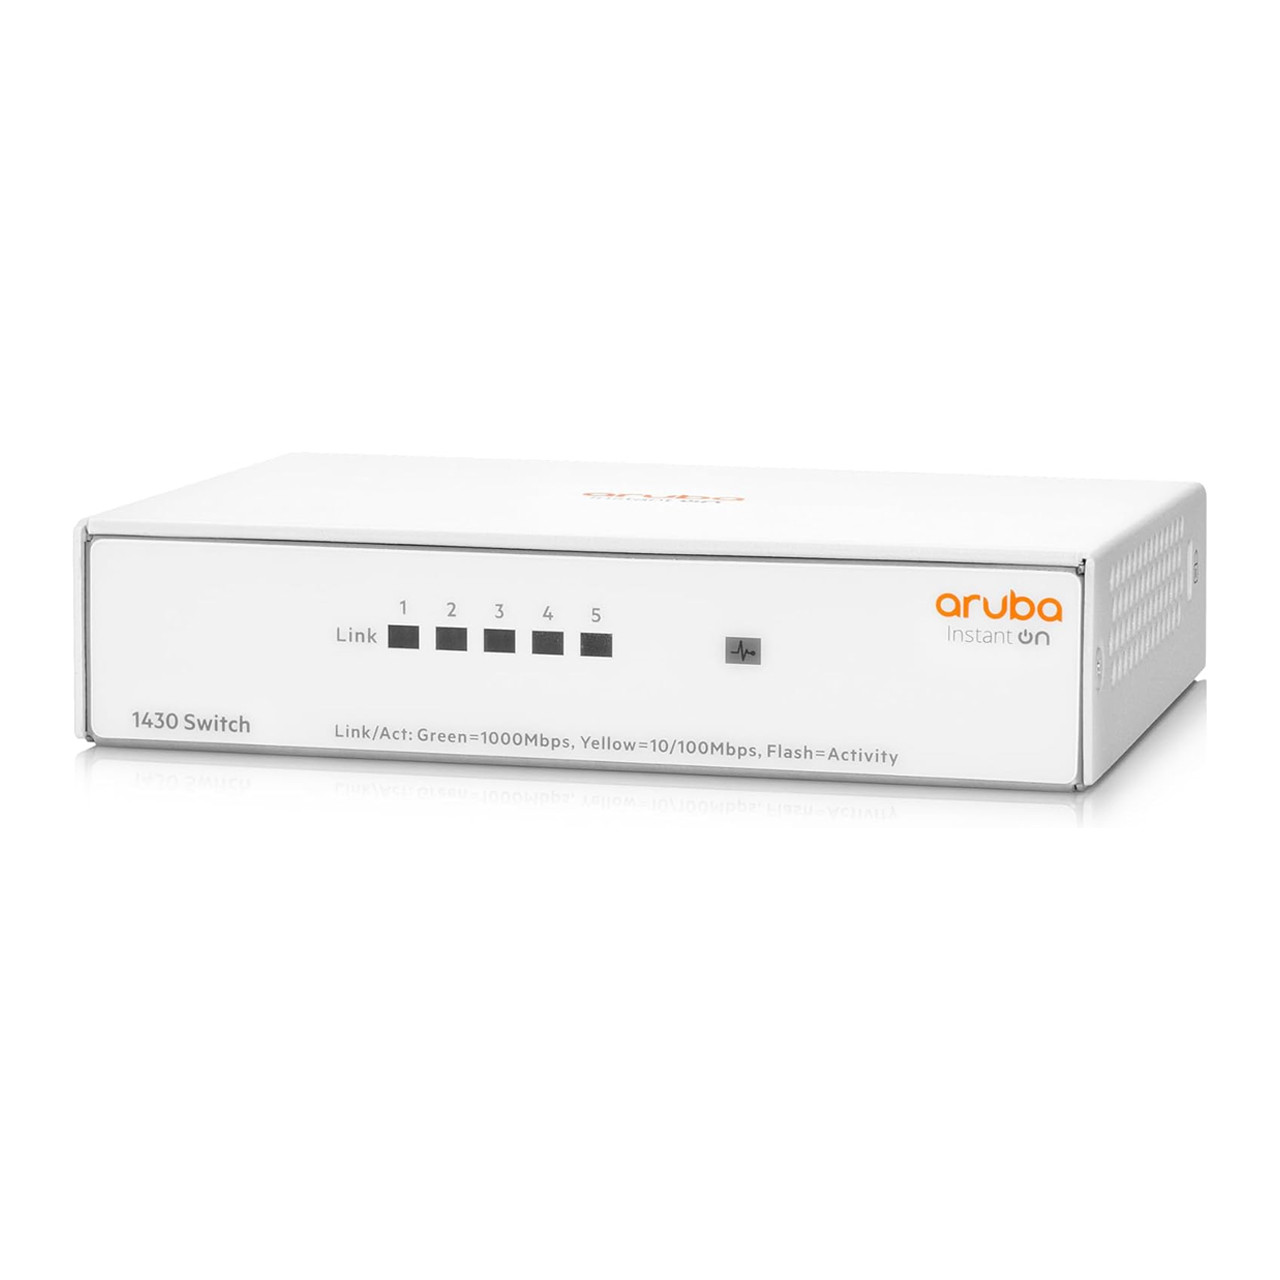 Aruba Instant On 1430 5-Port Gb Unmanaged Layer 2 Ethernet Switch | 5X 1G | Fan-Less | US Cord R8R44A#ABA